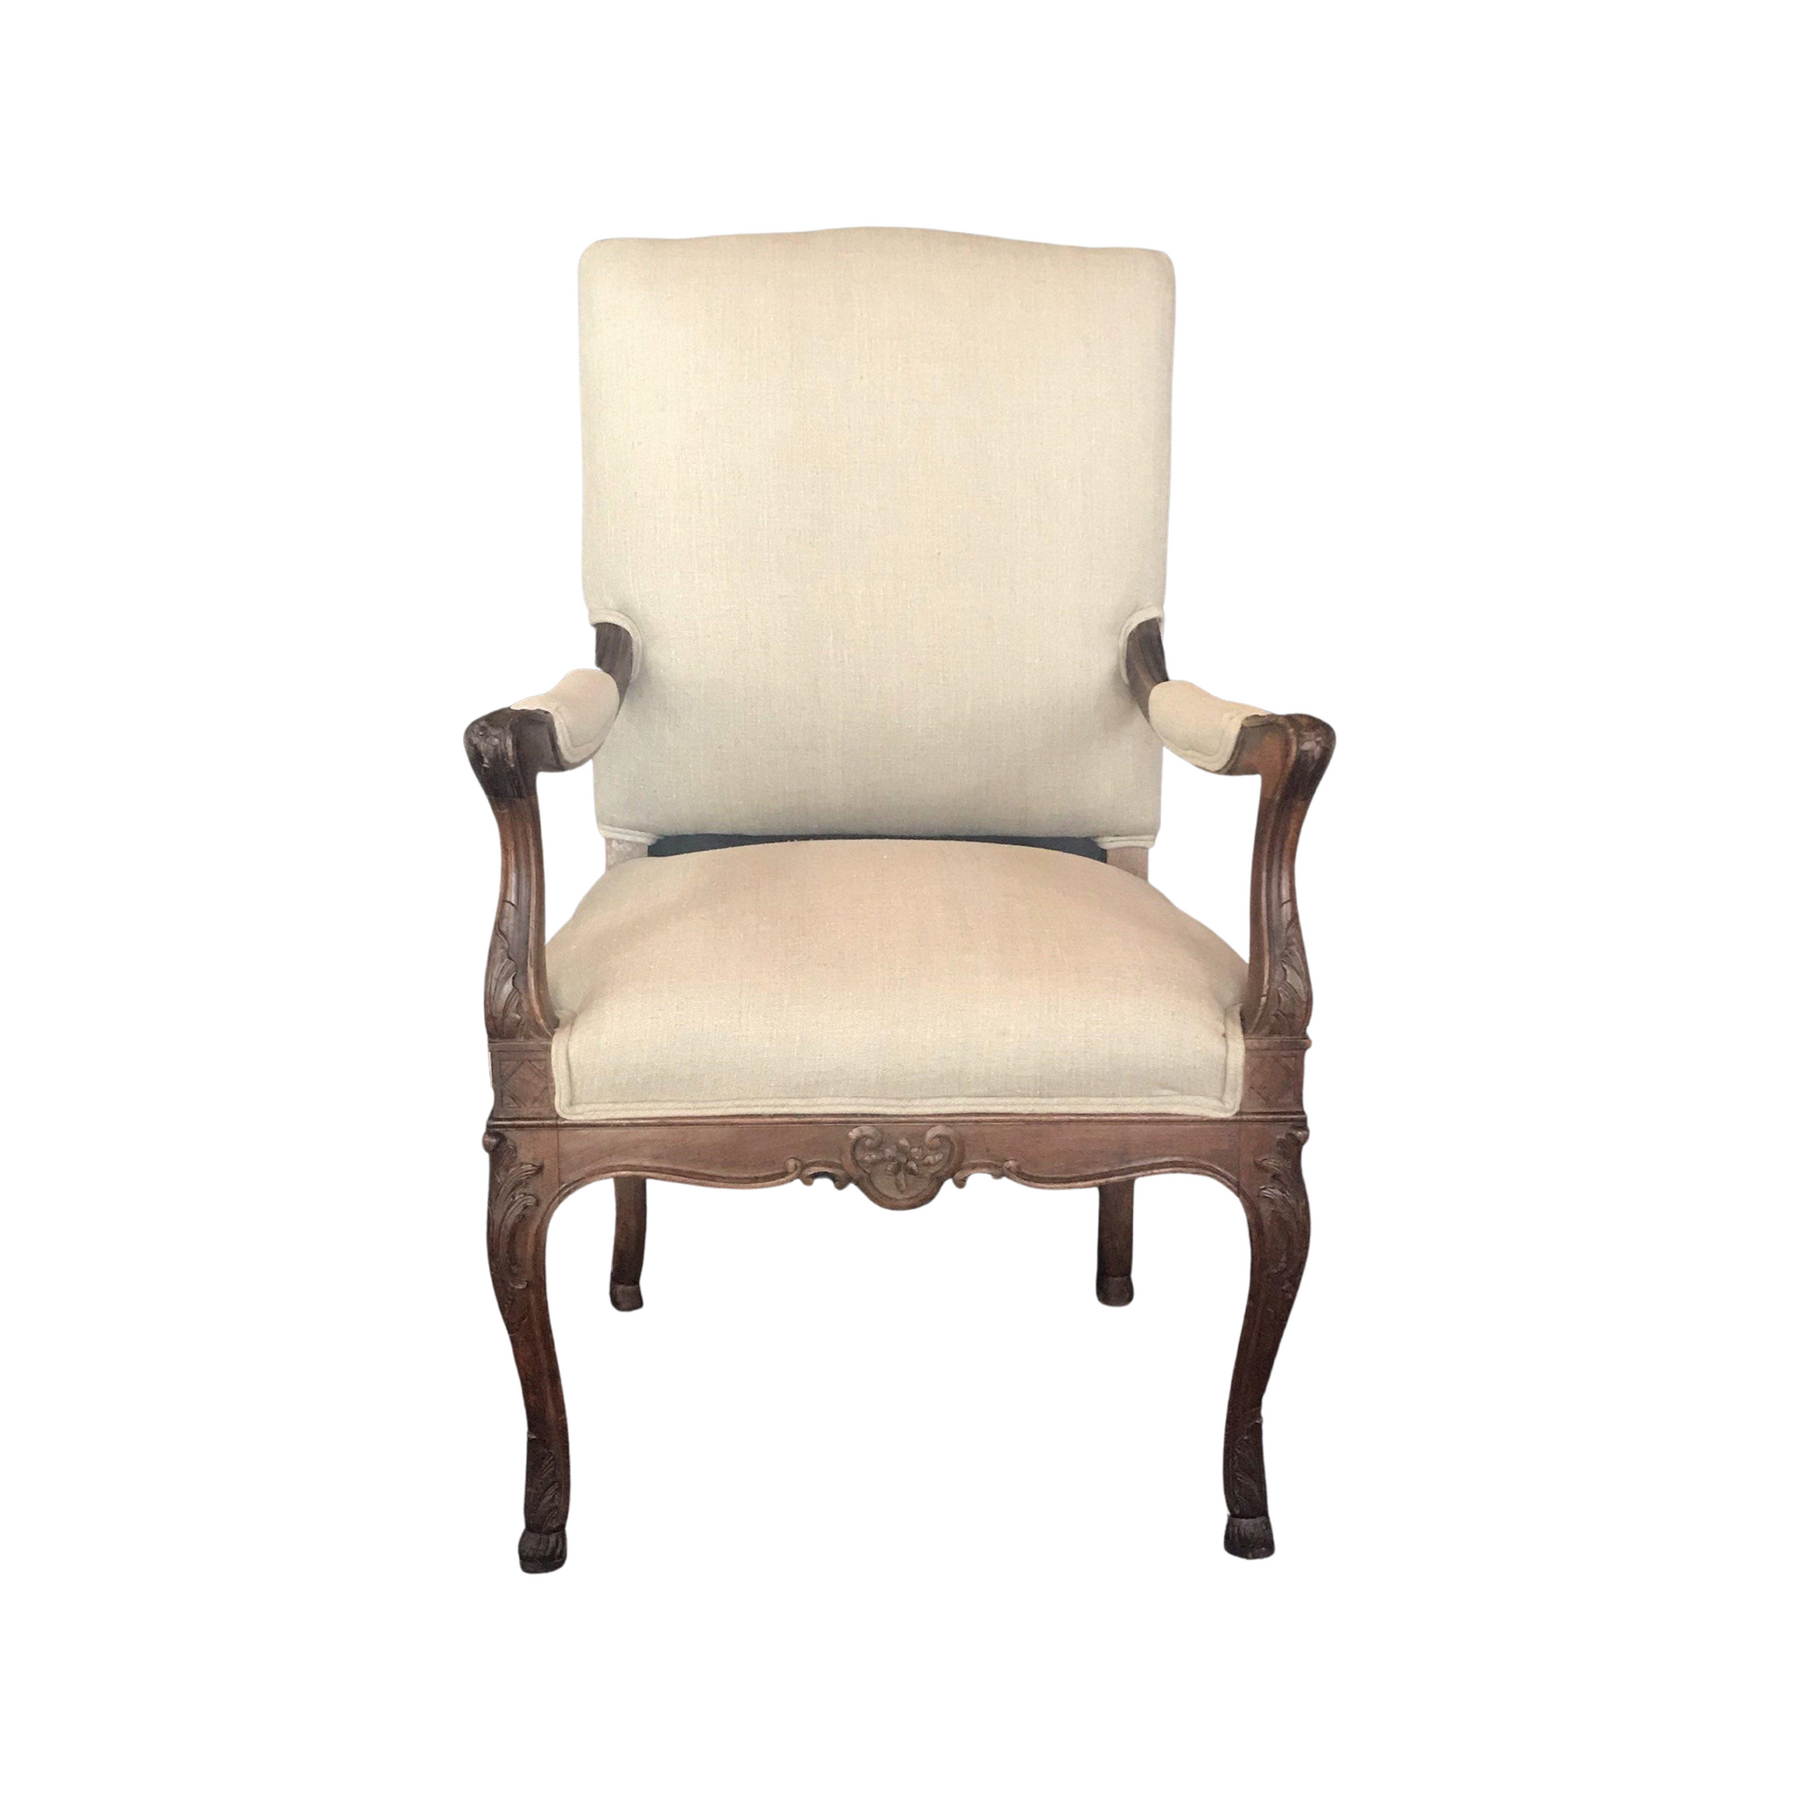 Antique Cream Leather & Wood/Walnut? Louis Style Arm Chair